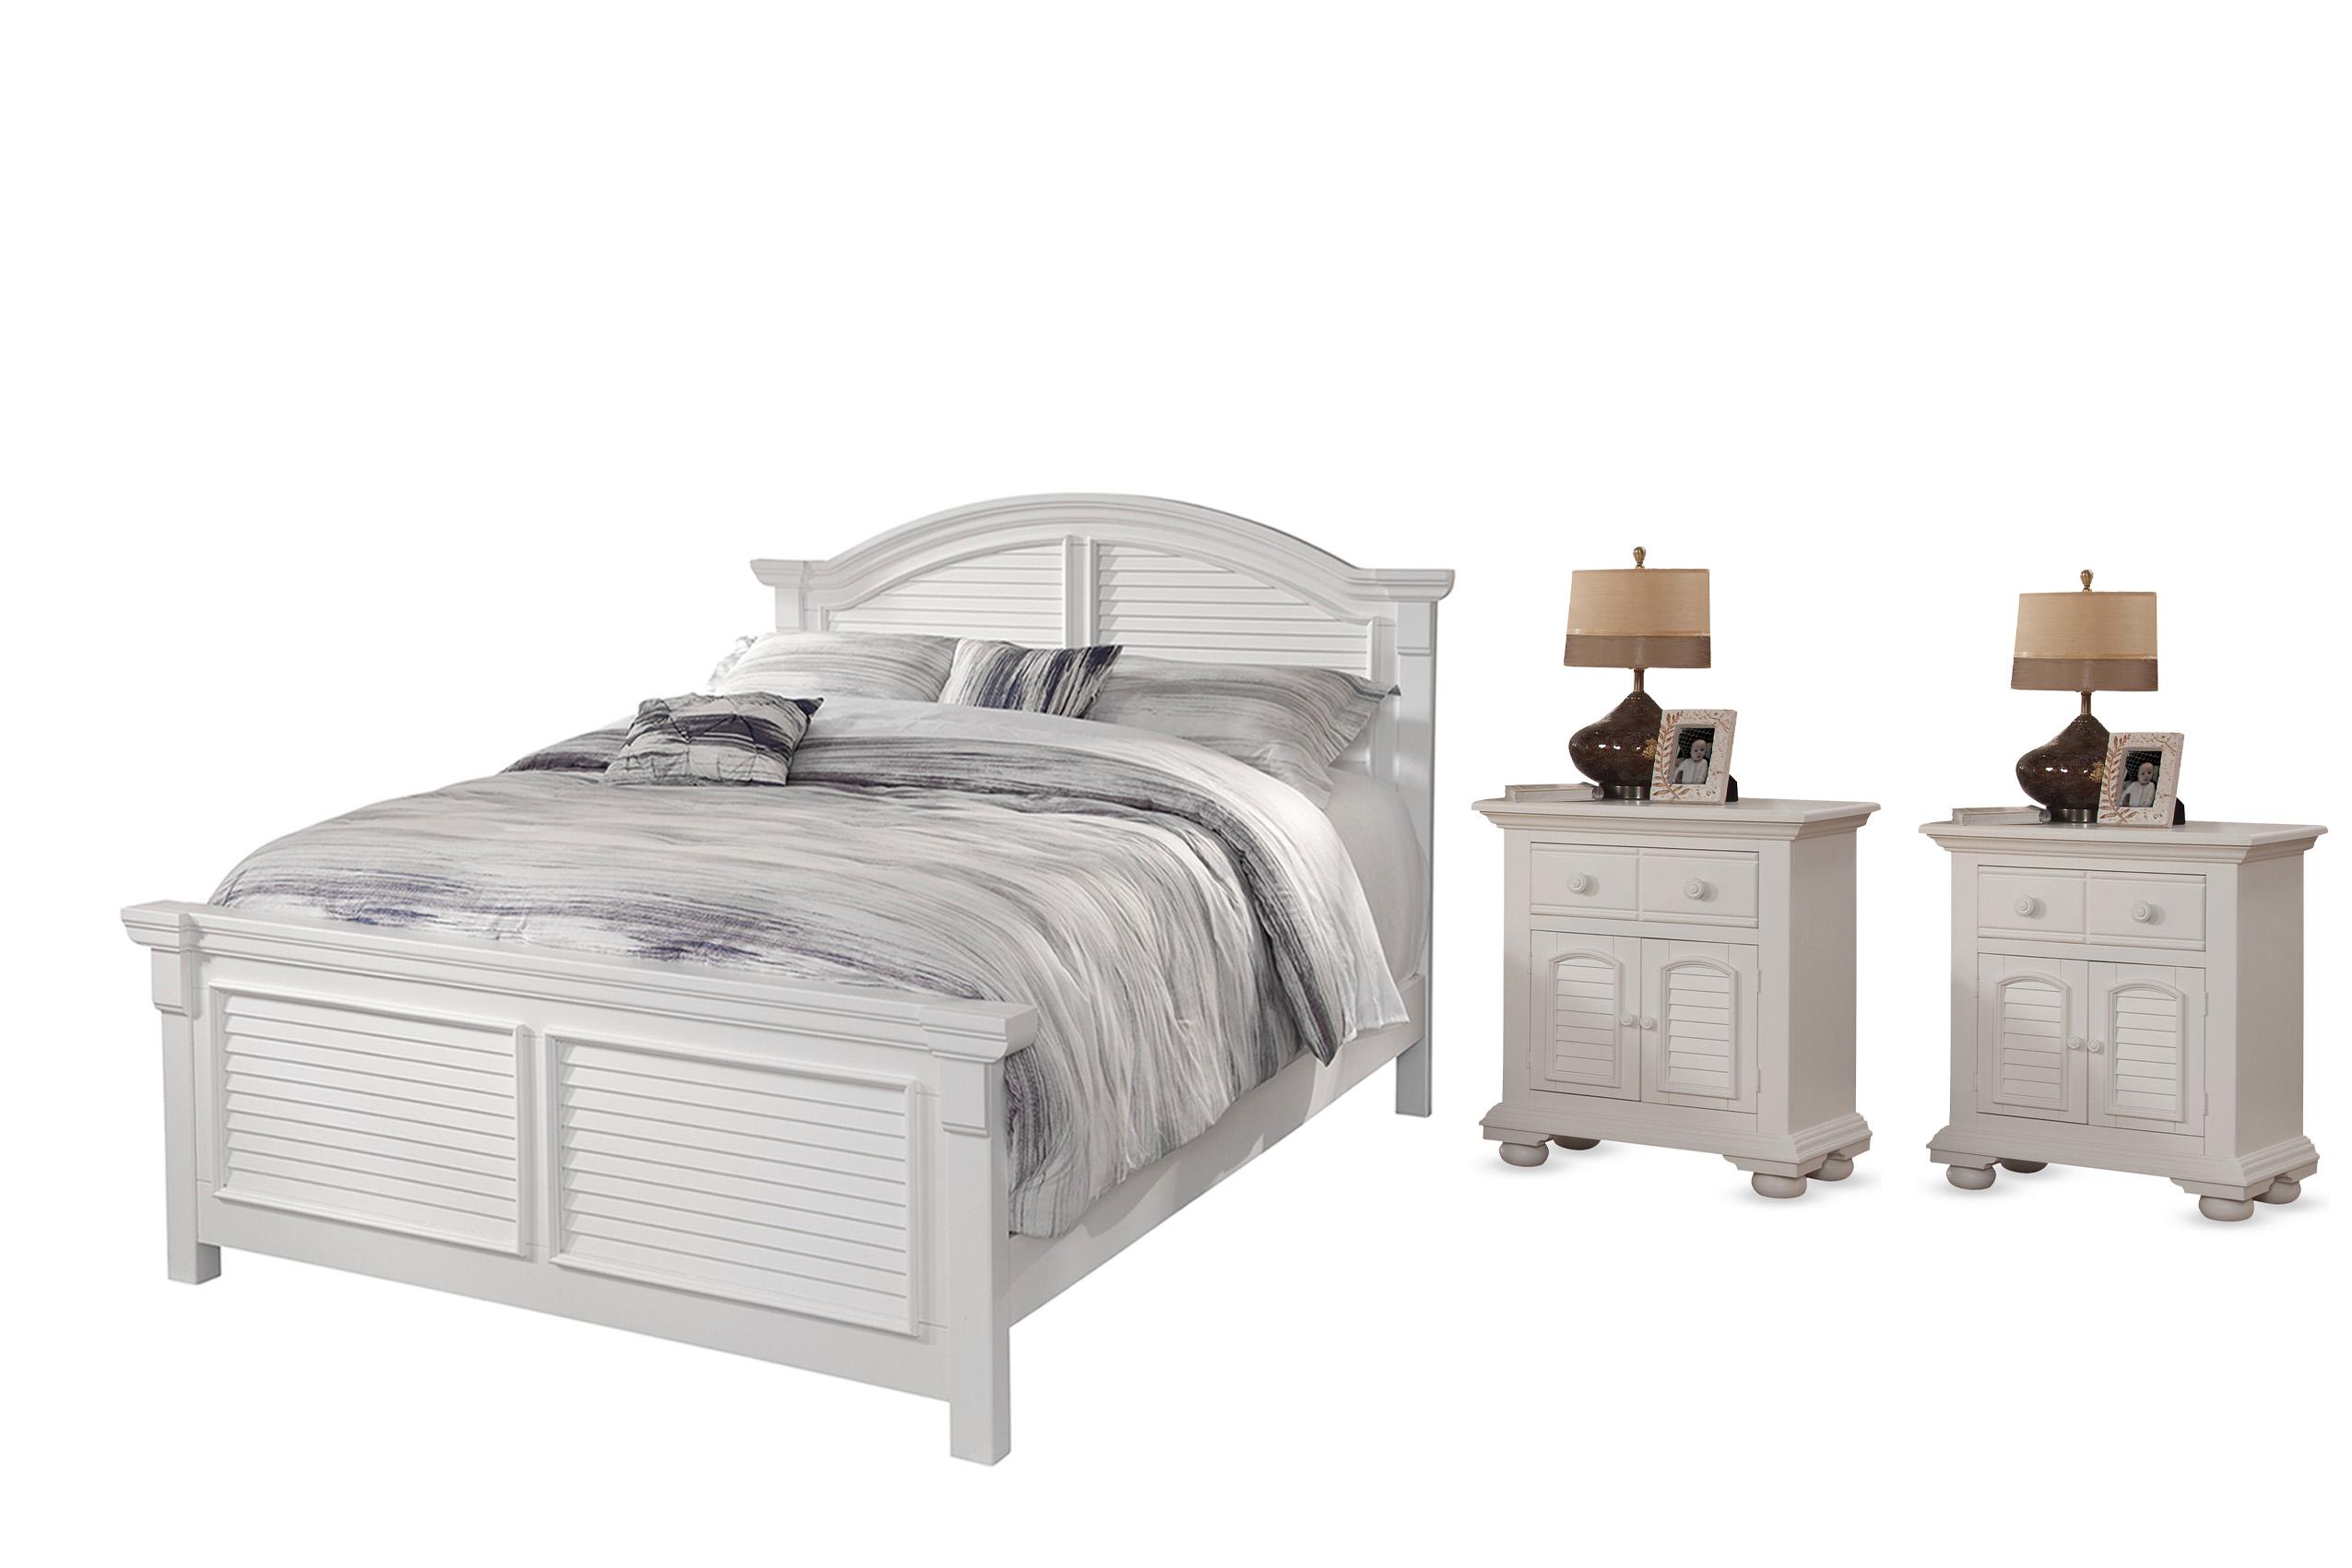 Classic, Traditional, Cottage Panel Bedroom Set COTTAGE 6510-50PAN 6510-50PAN 6510-412-2N-3PC in White 